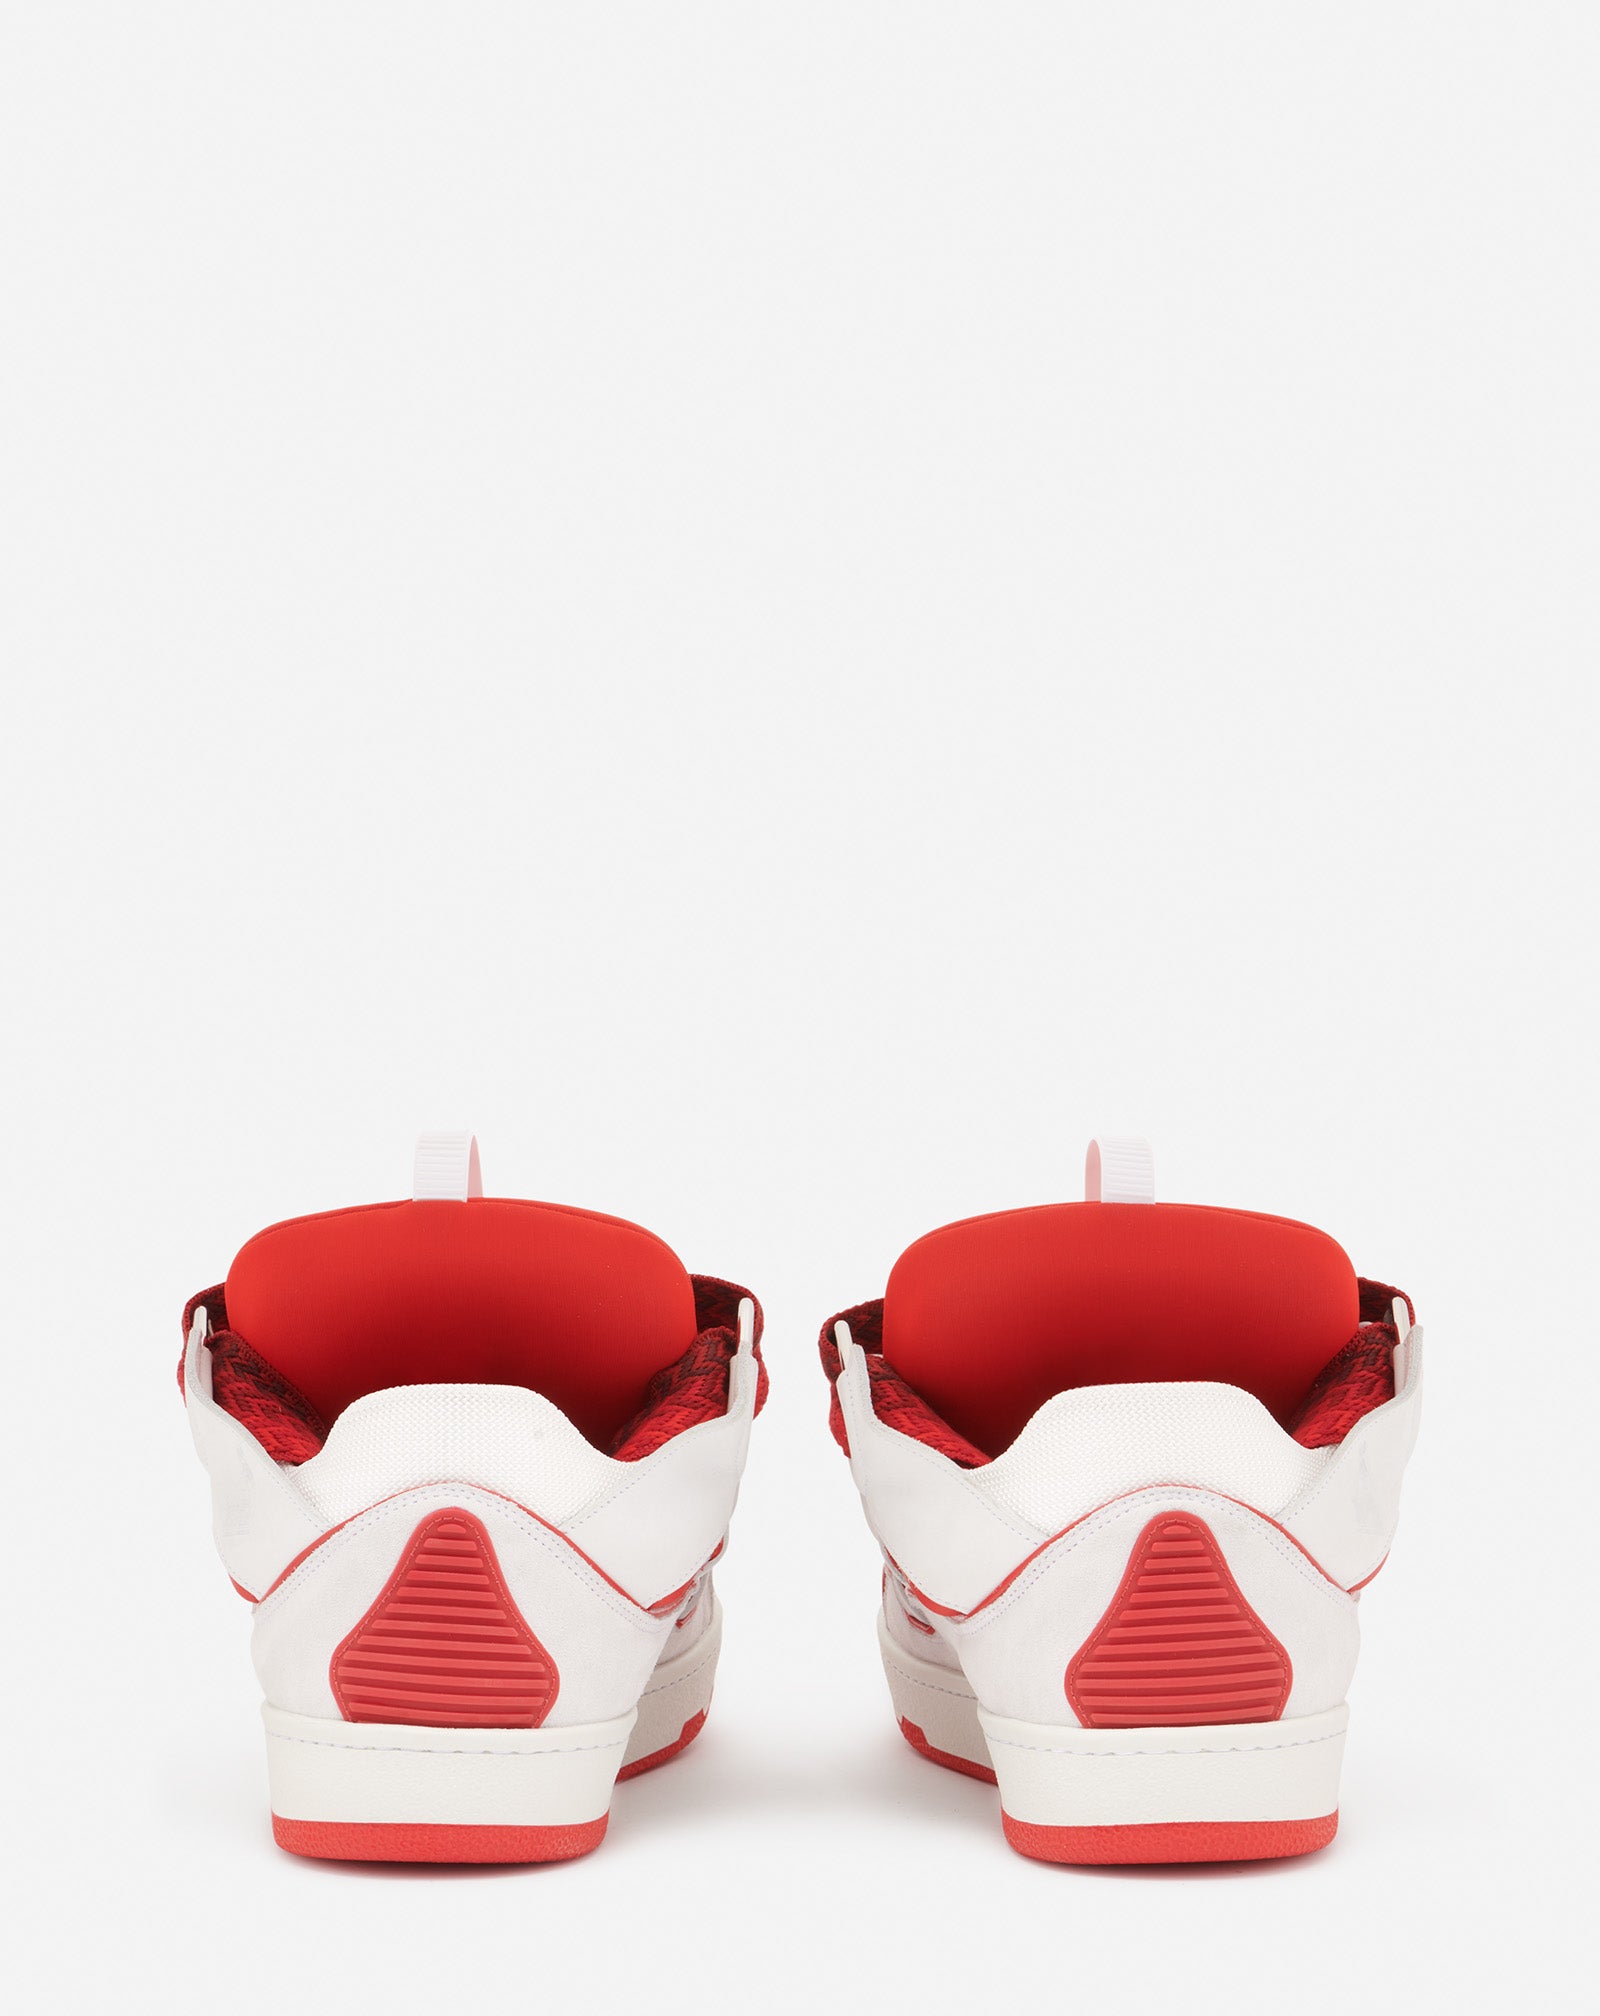 LEATHER CURB SNEAKERS, WHITE/RED